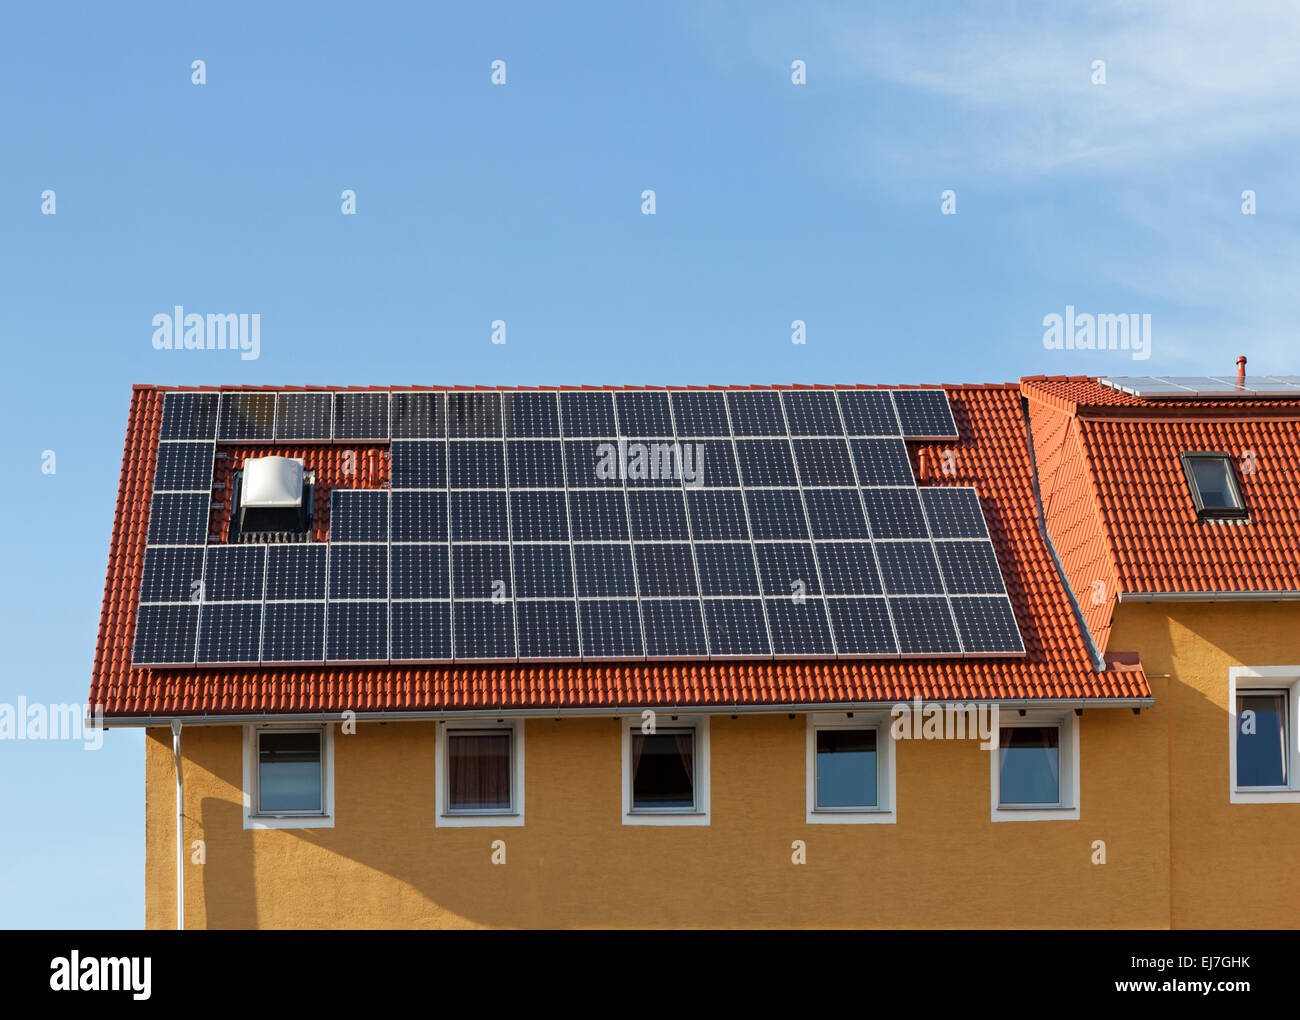 Solar panels on the roof Stock Photo